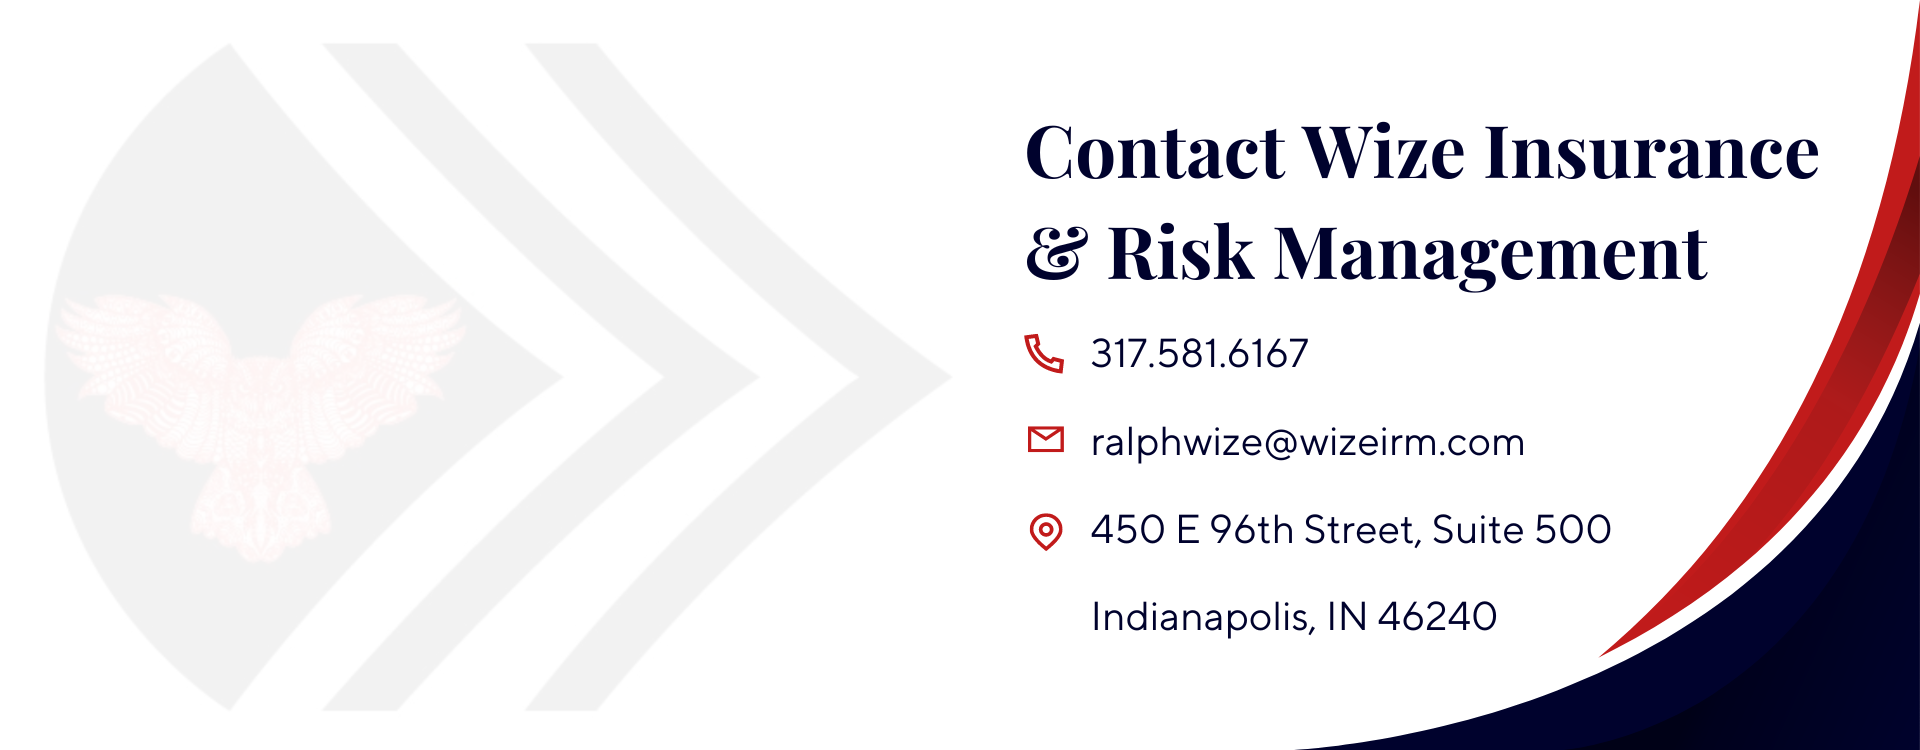 Contact Wize Insurance & Risk Management